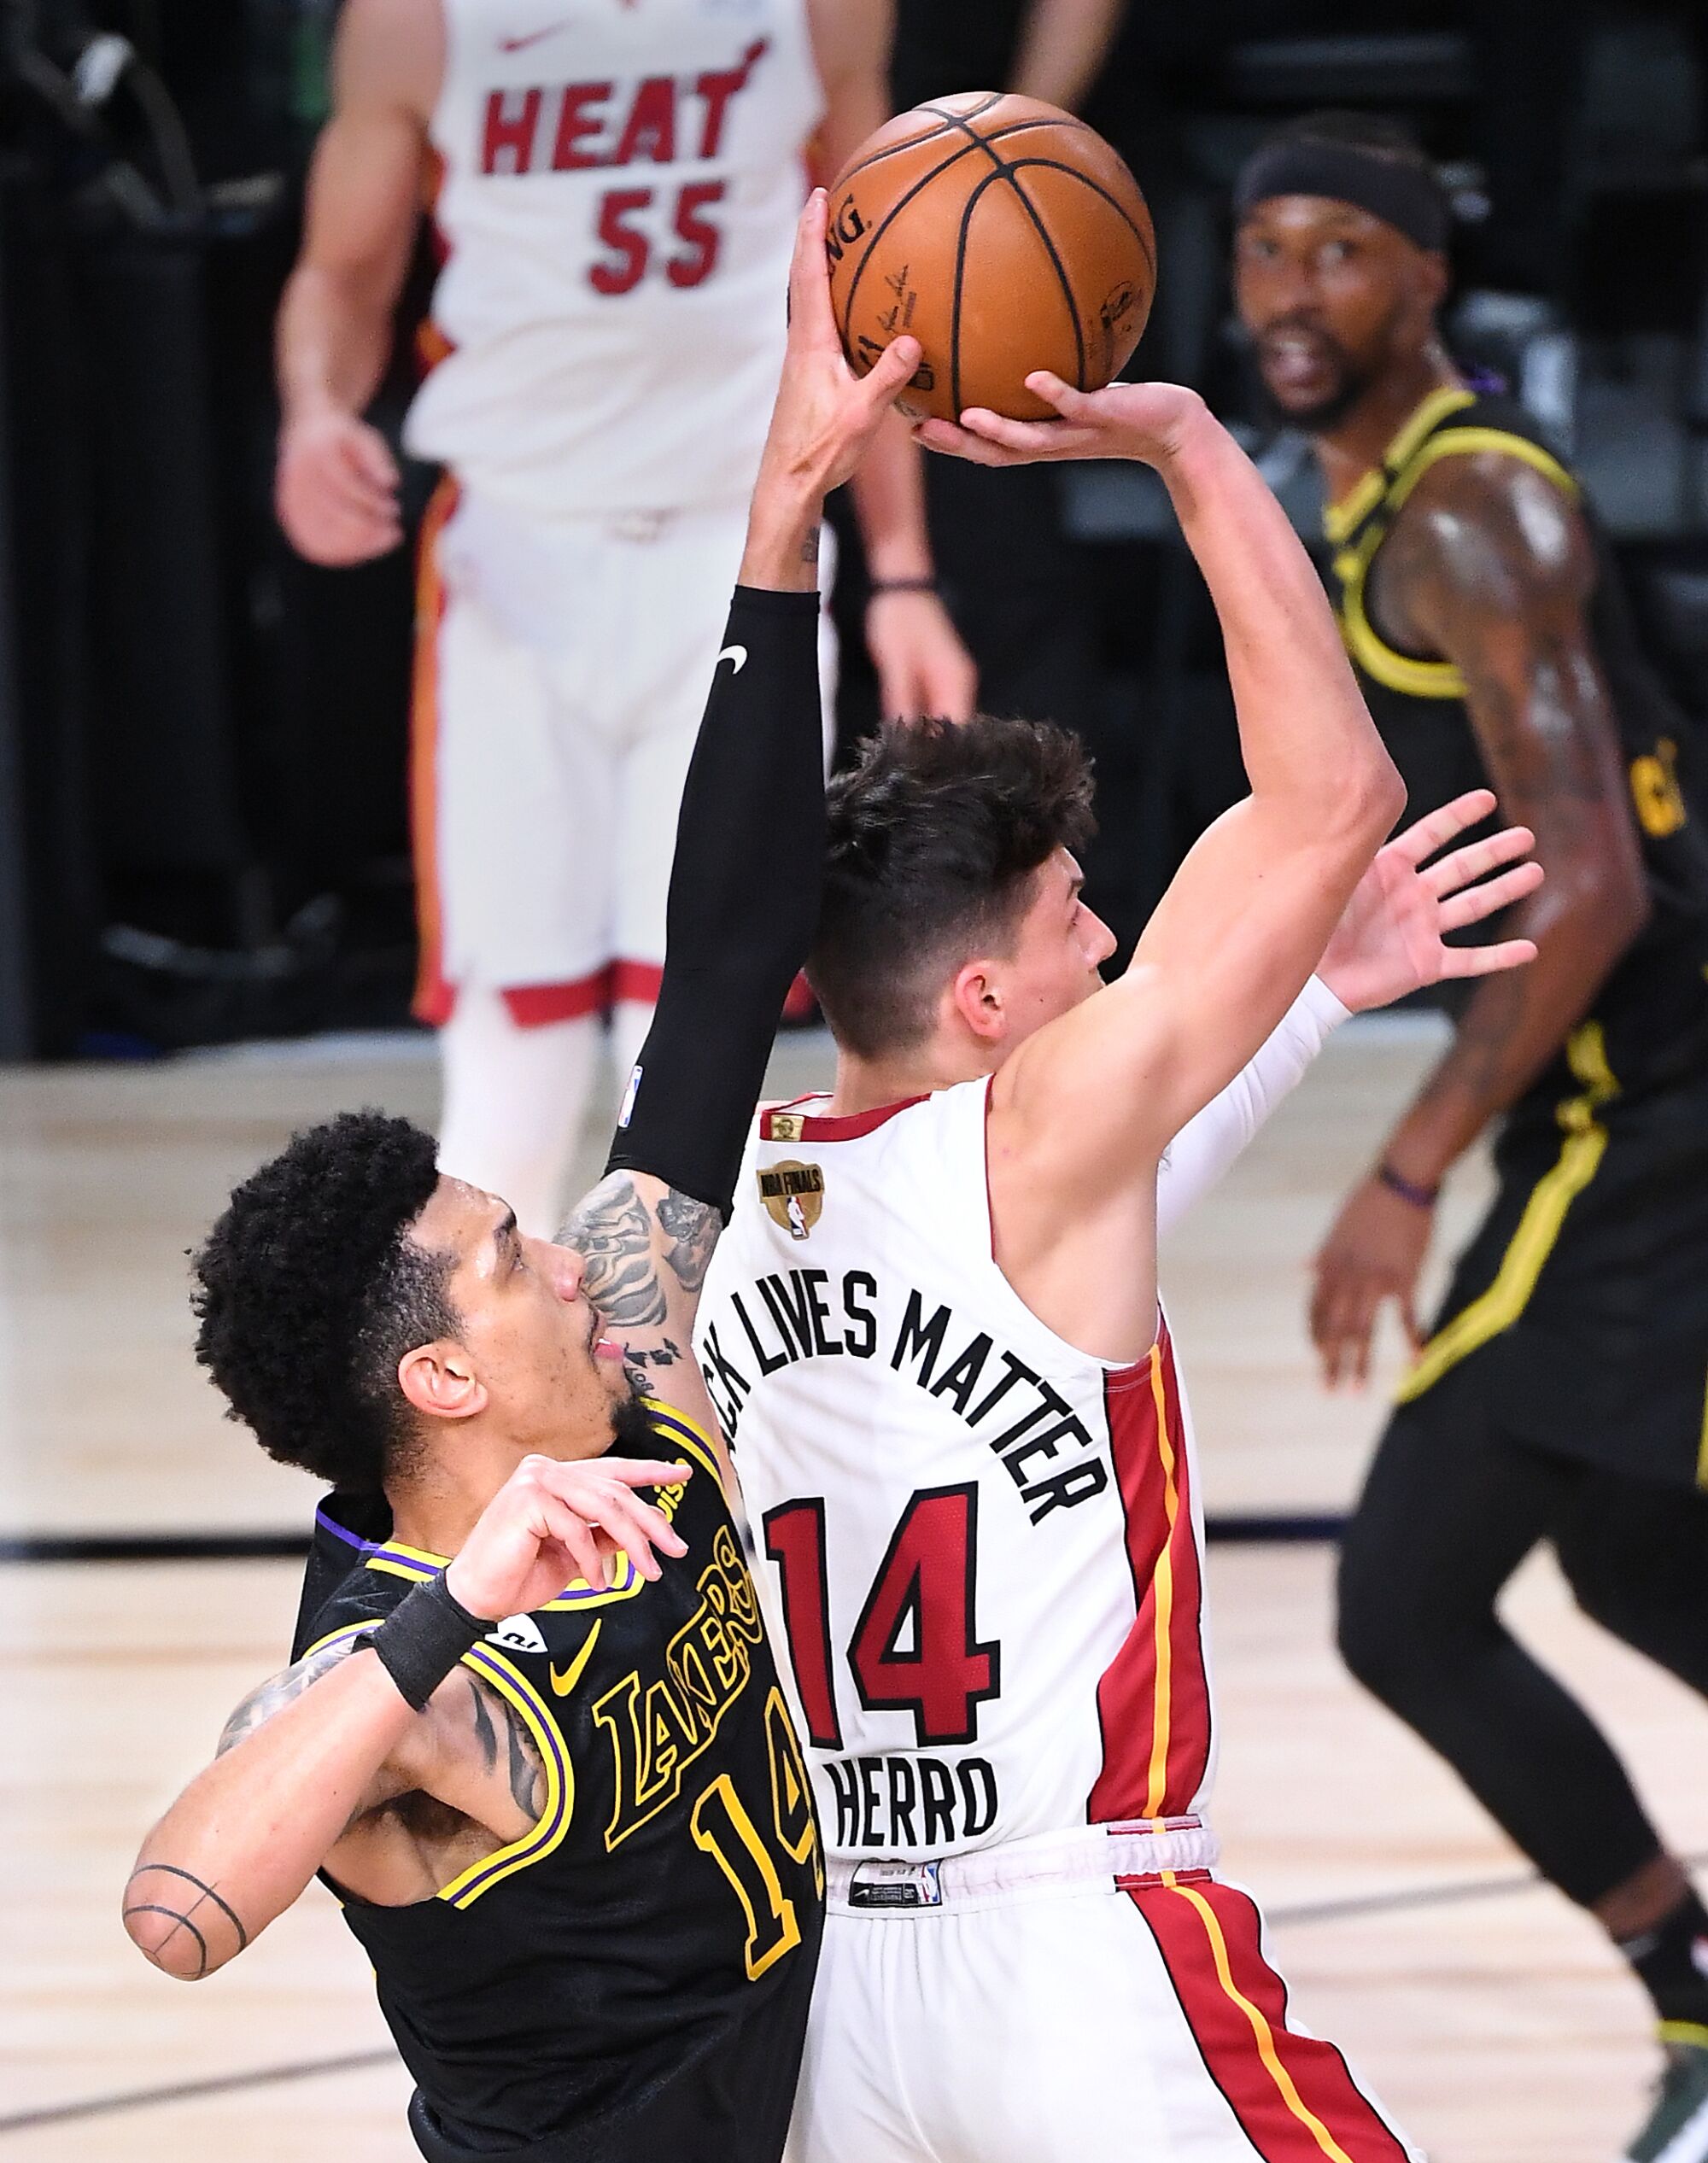 Lakers guard Danny Green blocks a shot by Miami Heat guard Tyler Herro during the first quarter of Game 5.